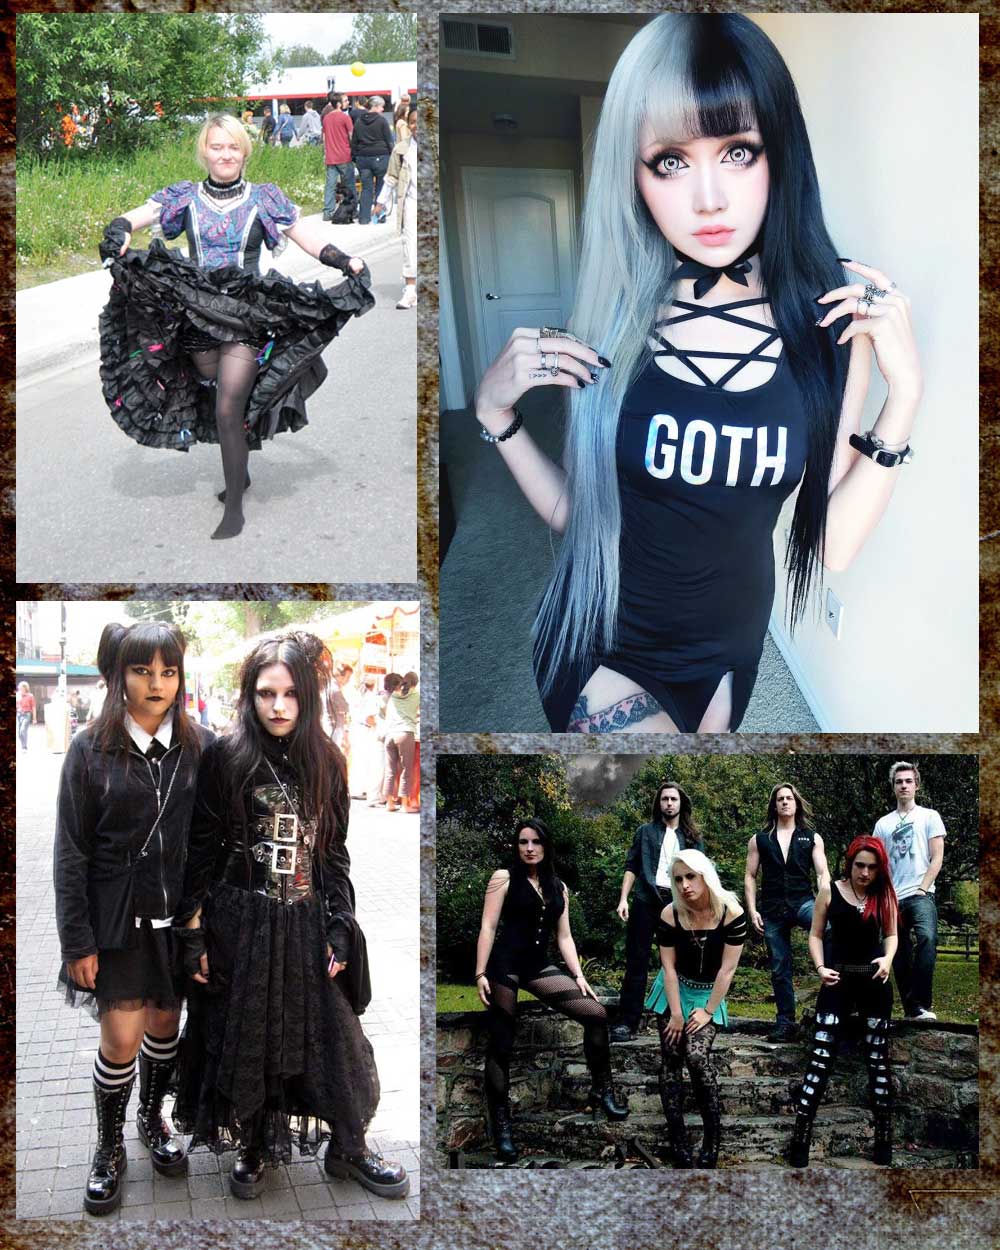 wannabe goths and baby bats